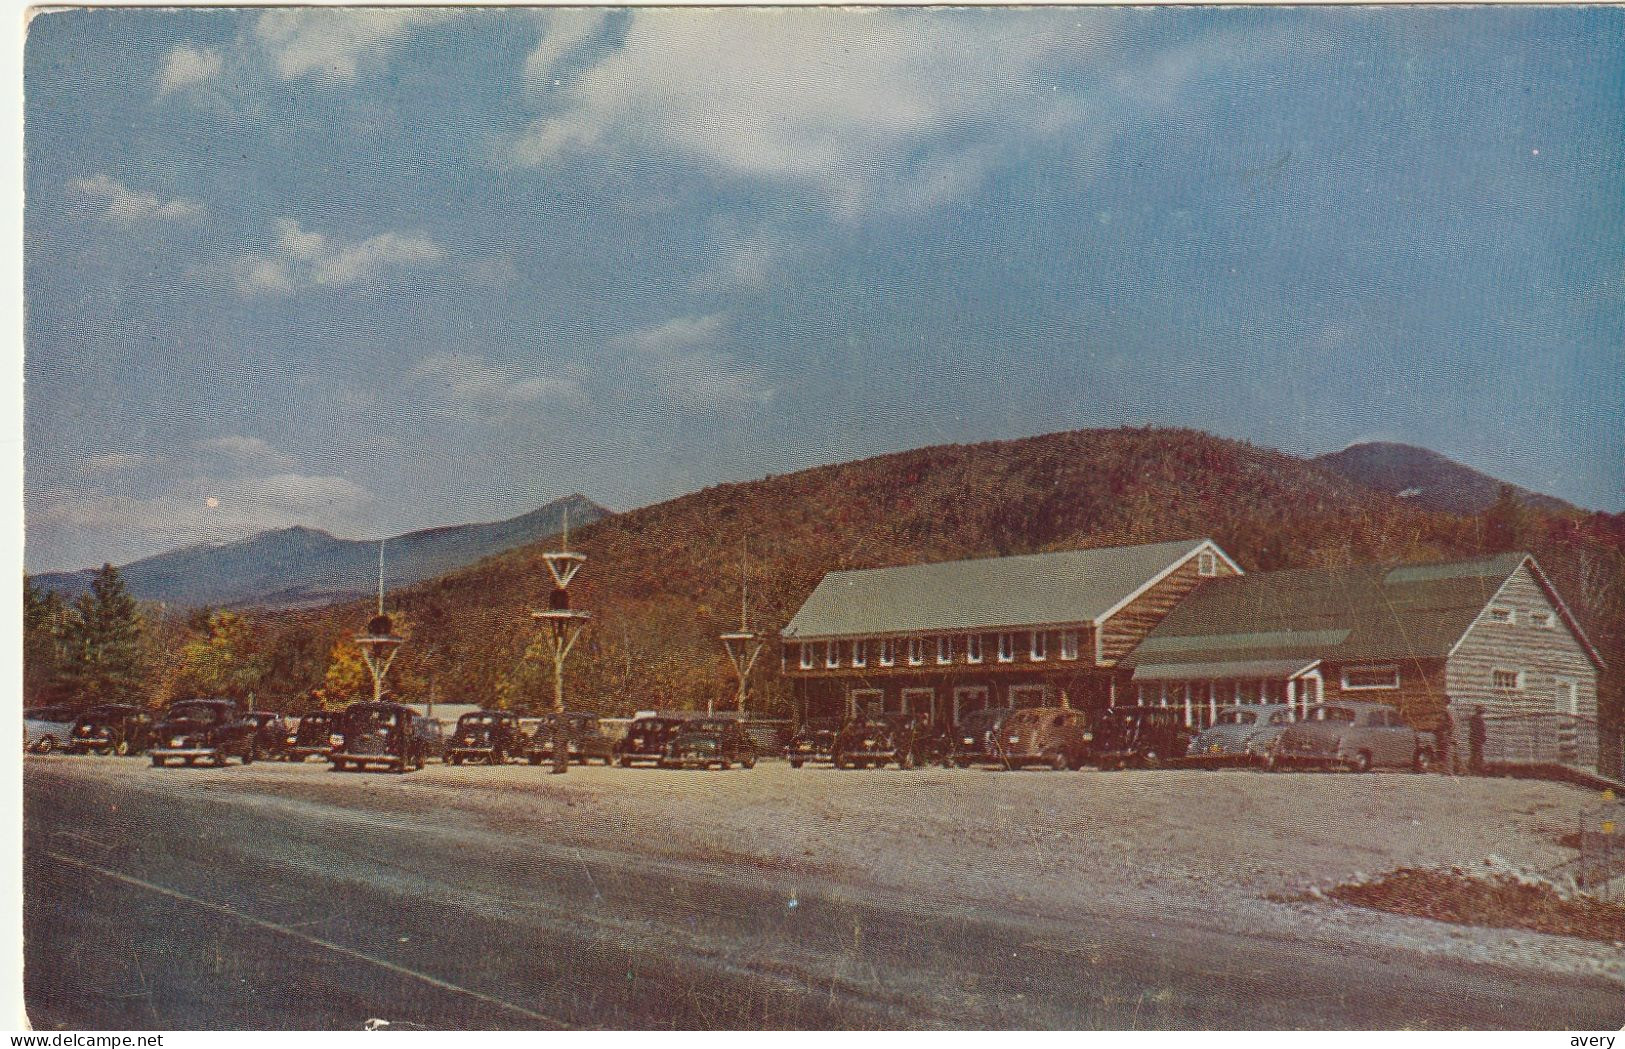 Clark's Trading Post, Located In The Heart Of The White Mountains Of New Hampshire, 1 Mile North Of Woodstock - White Mountains